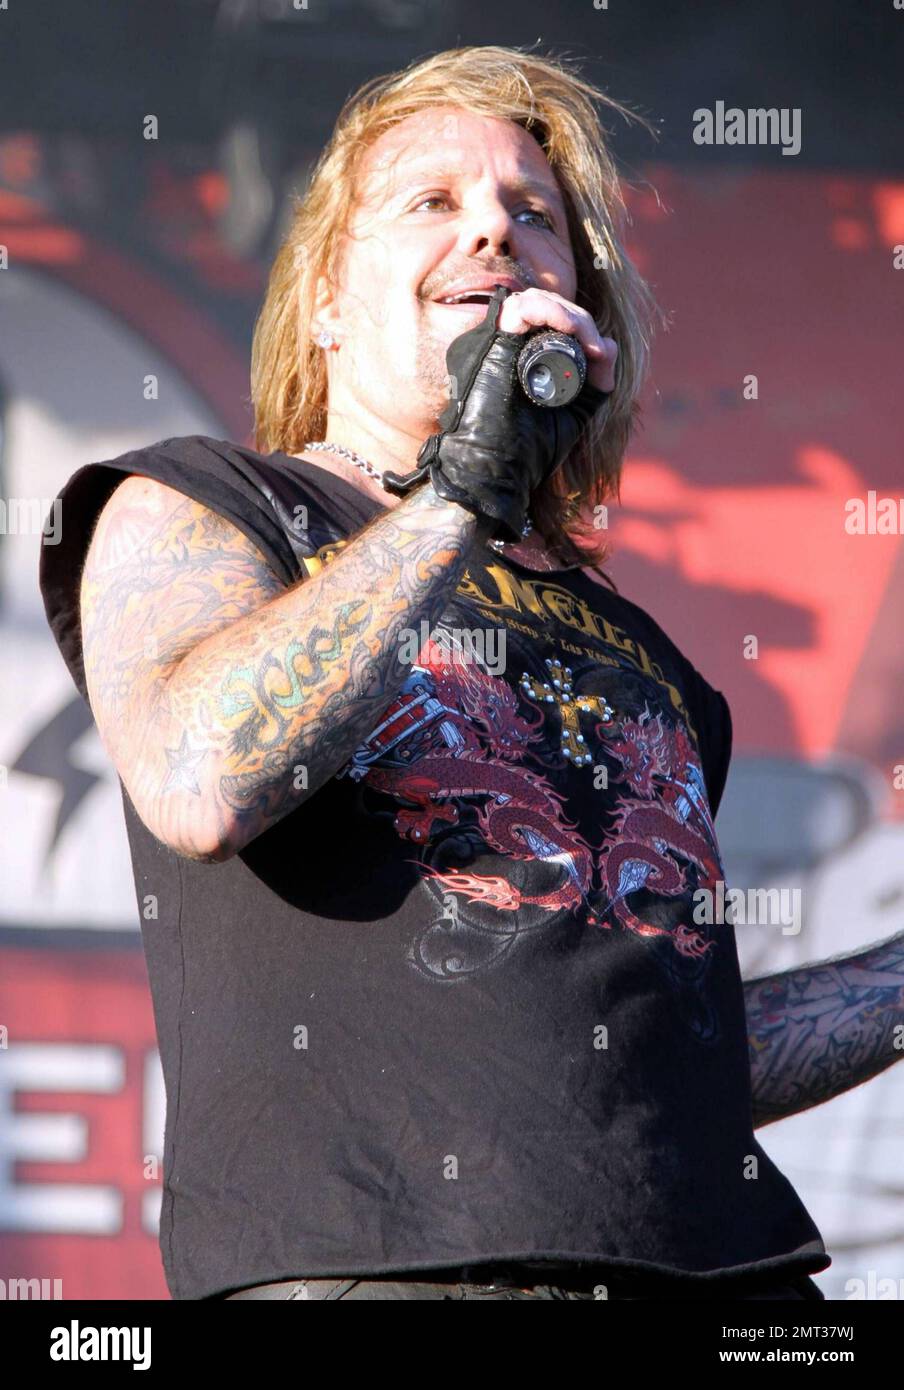 Metal legends Motley Crue perform live at the Sonisphere Festival. Lead  singer Vince Neil was arrested earlier this month in Las Vegas for drunk  driving. It's reported that Neil's arrest will not